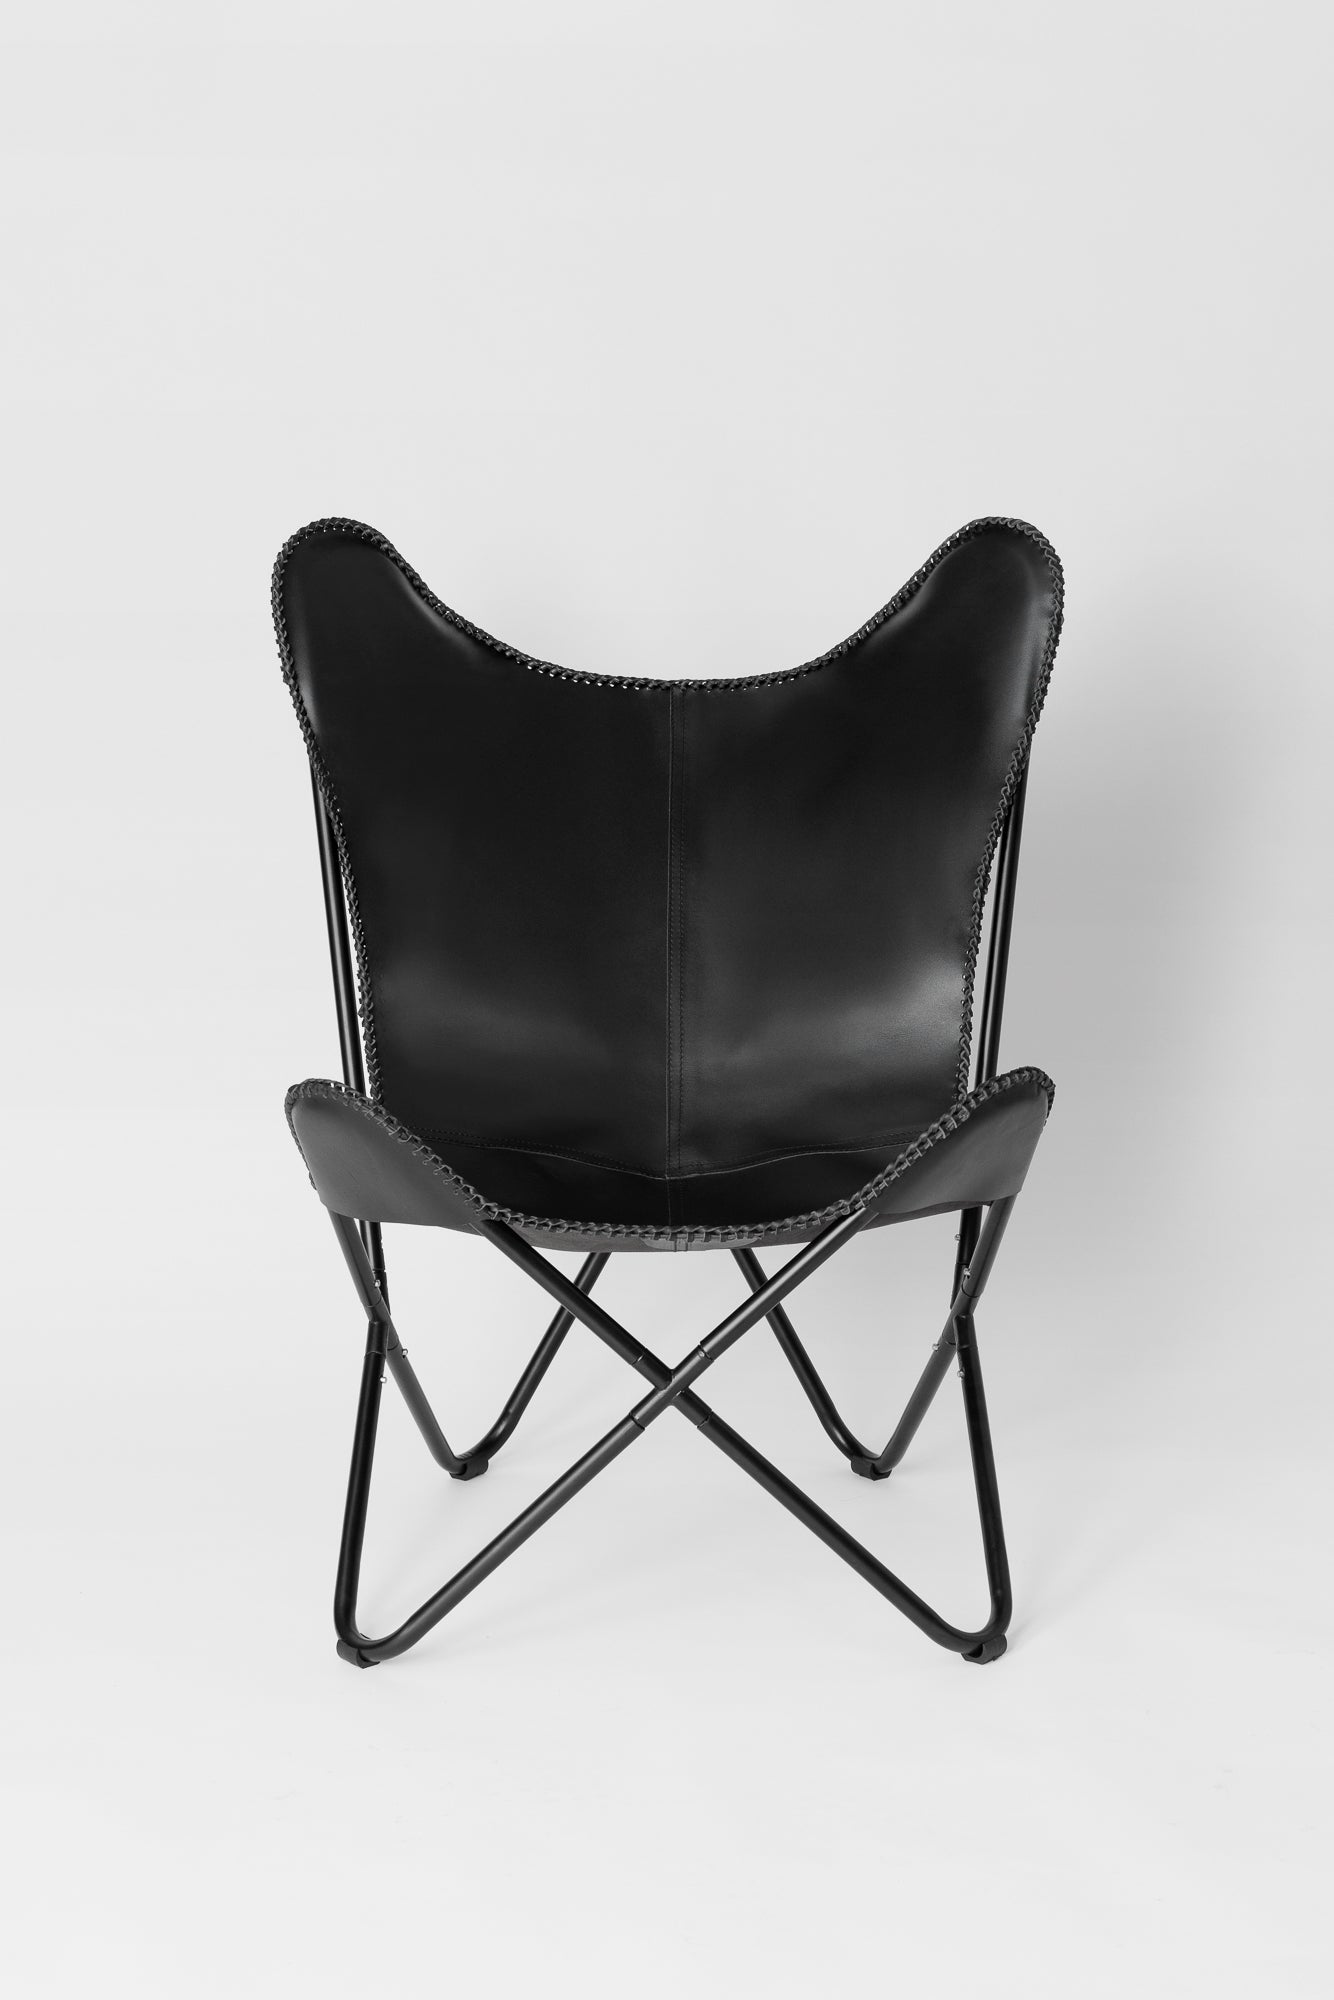 Lena Chair- Black Leather - Butterfly Chair